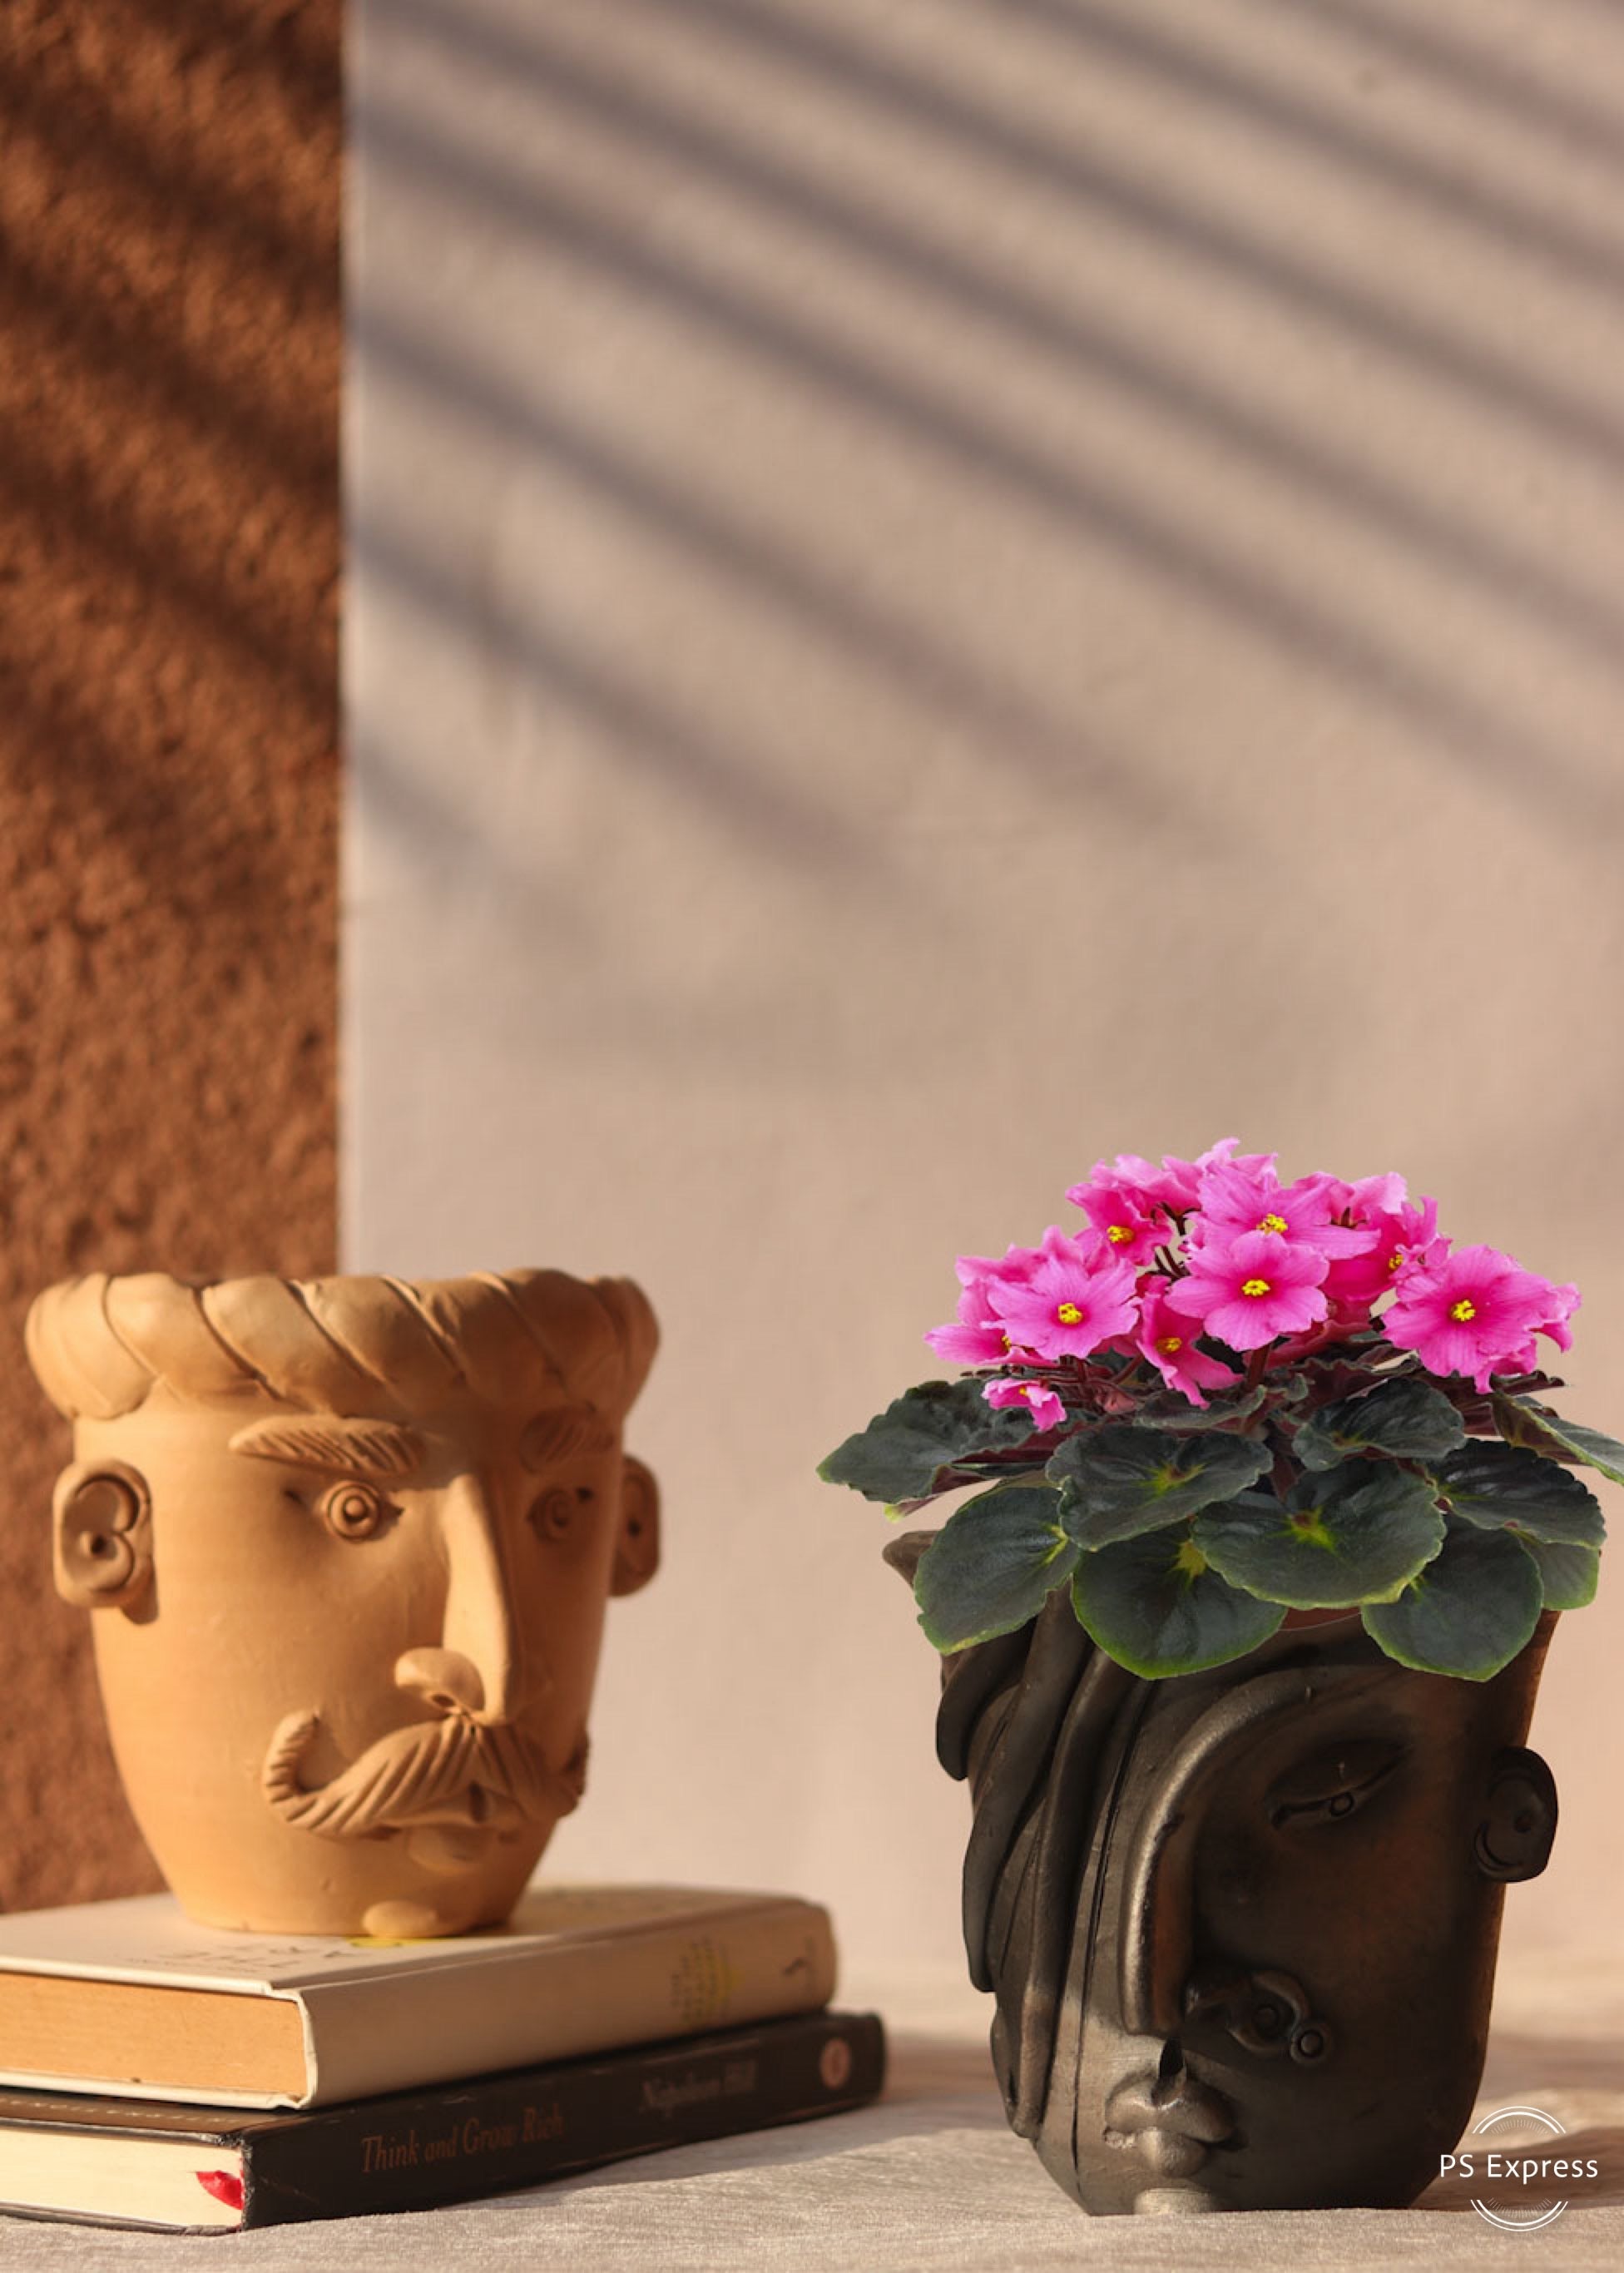 A black clay planter in a shape of a woman's face with pink flower is a kept on the table. behind it is a clay white planter in a shape of man's face kept on the book pile